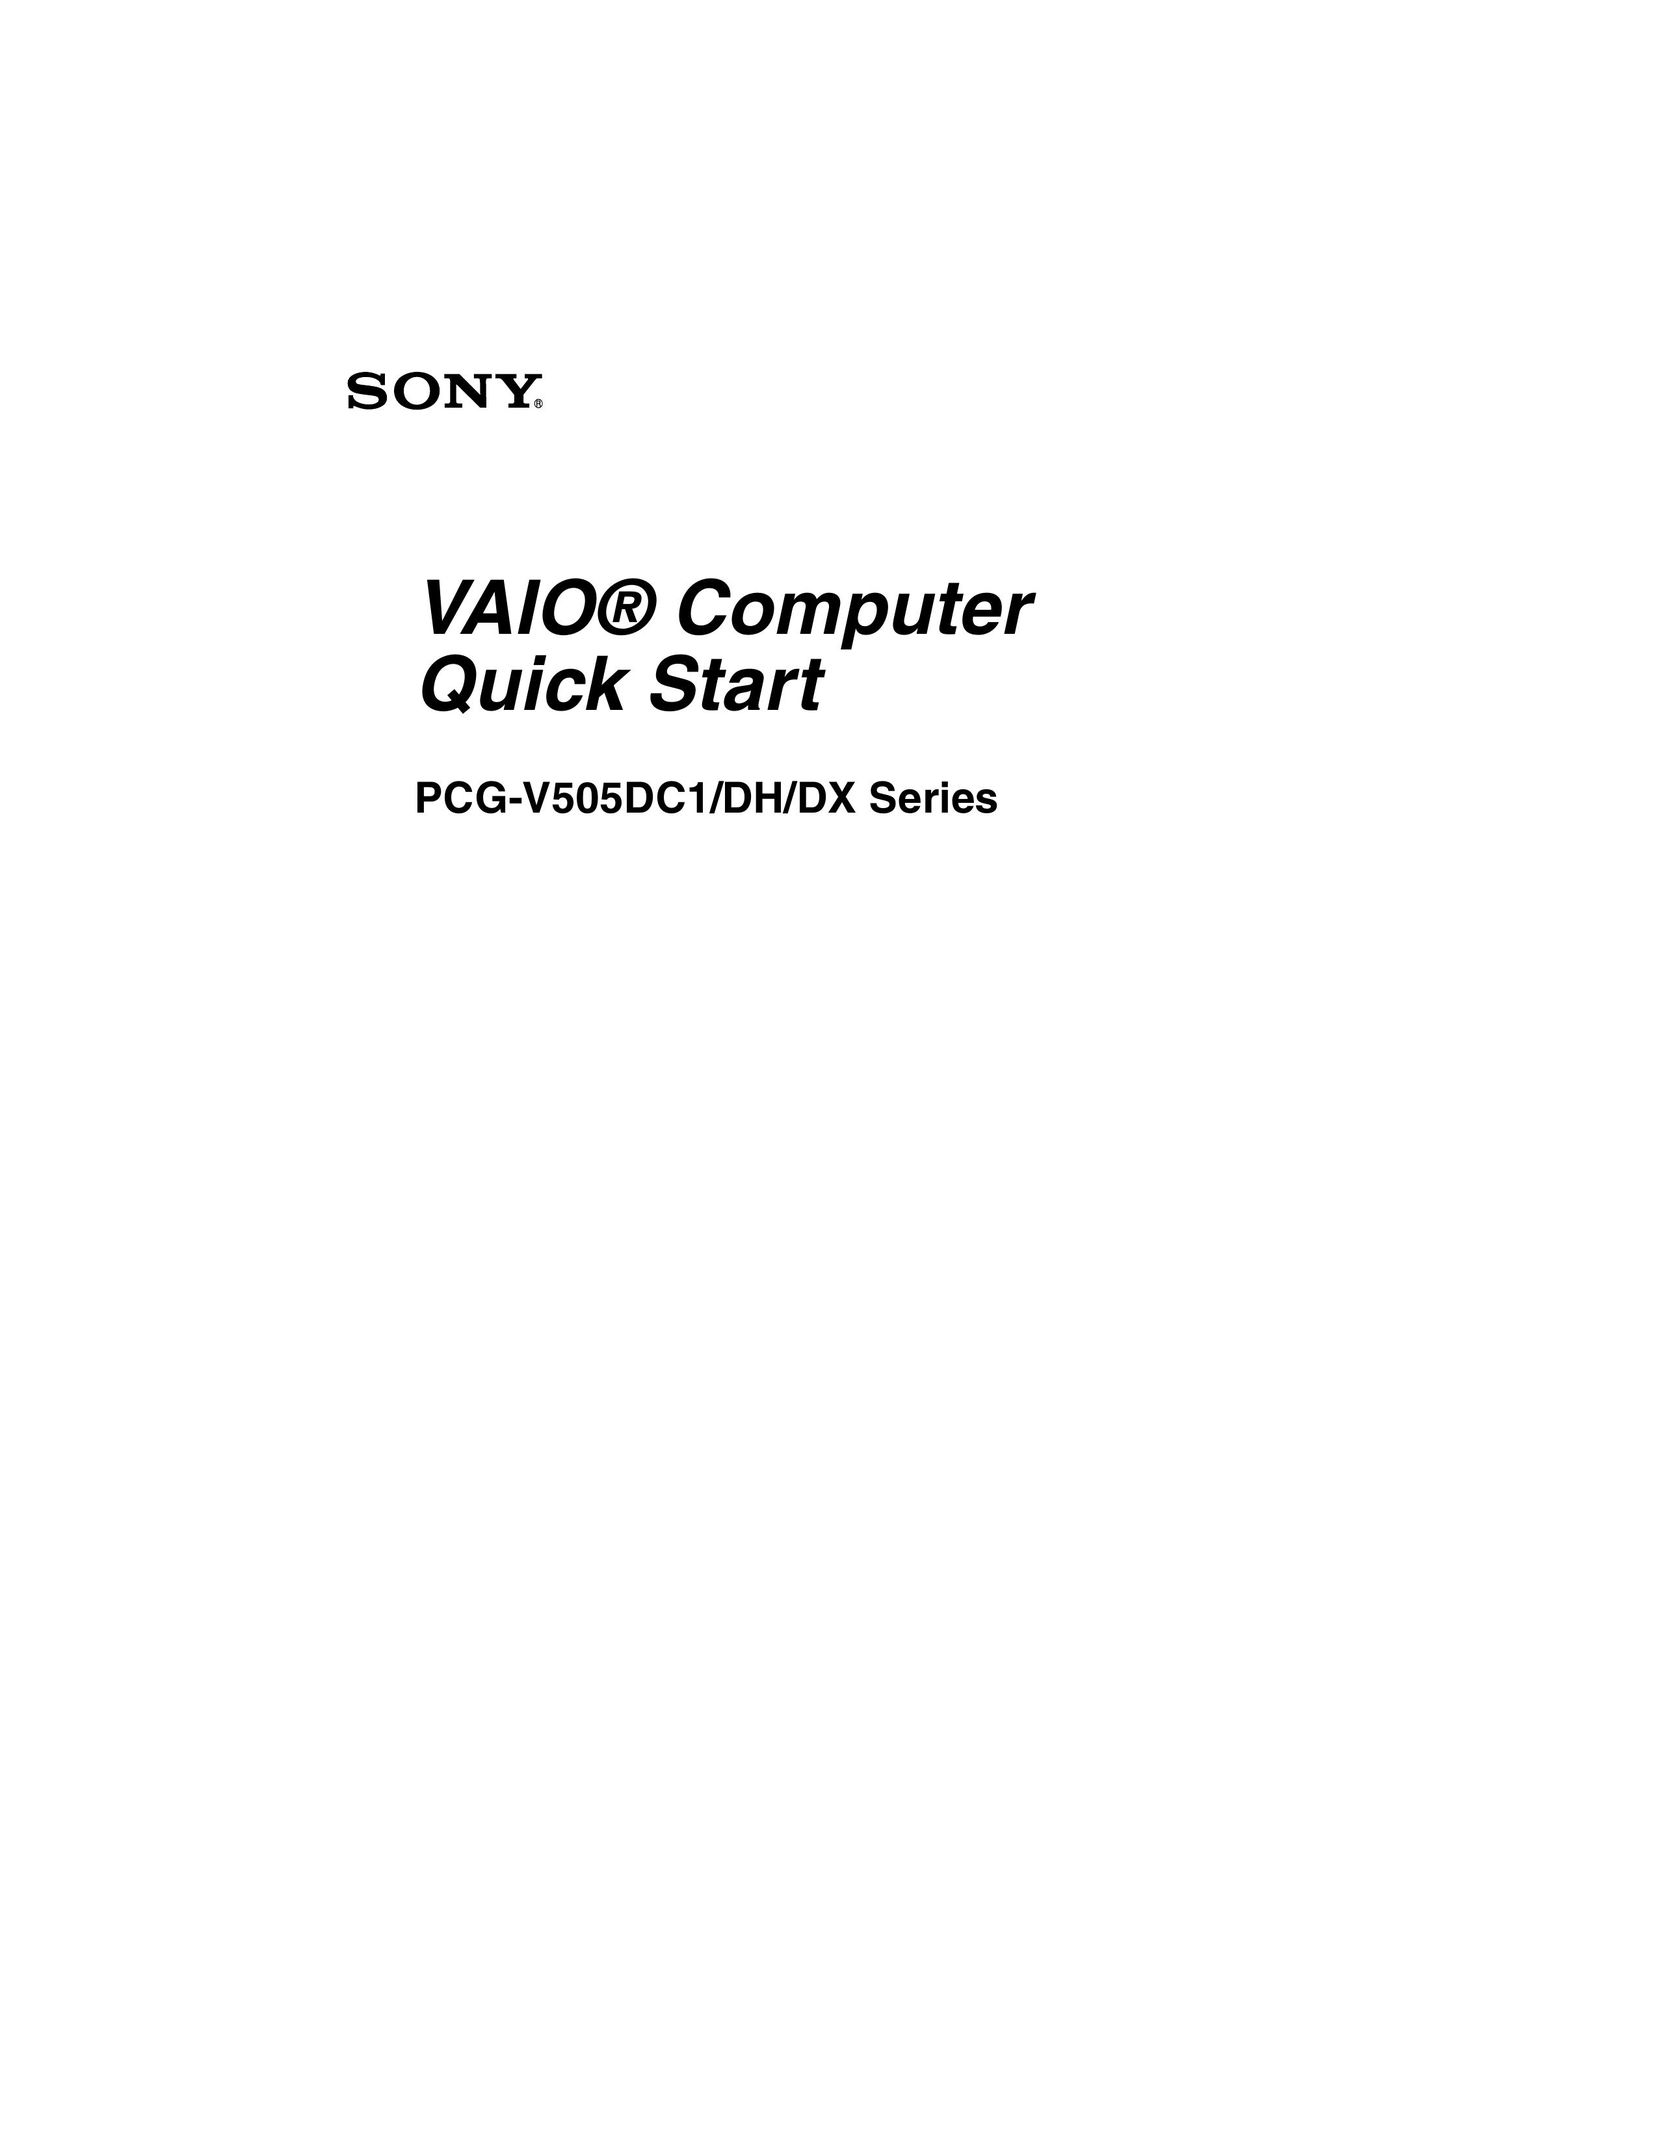 Sony PCG-V505DC1 Personal Computer User Manual